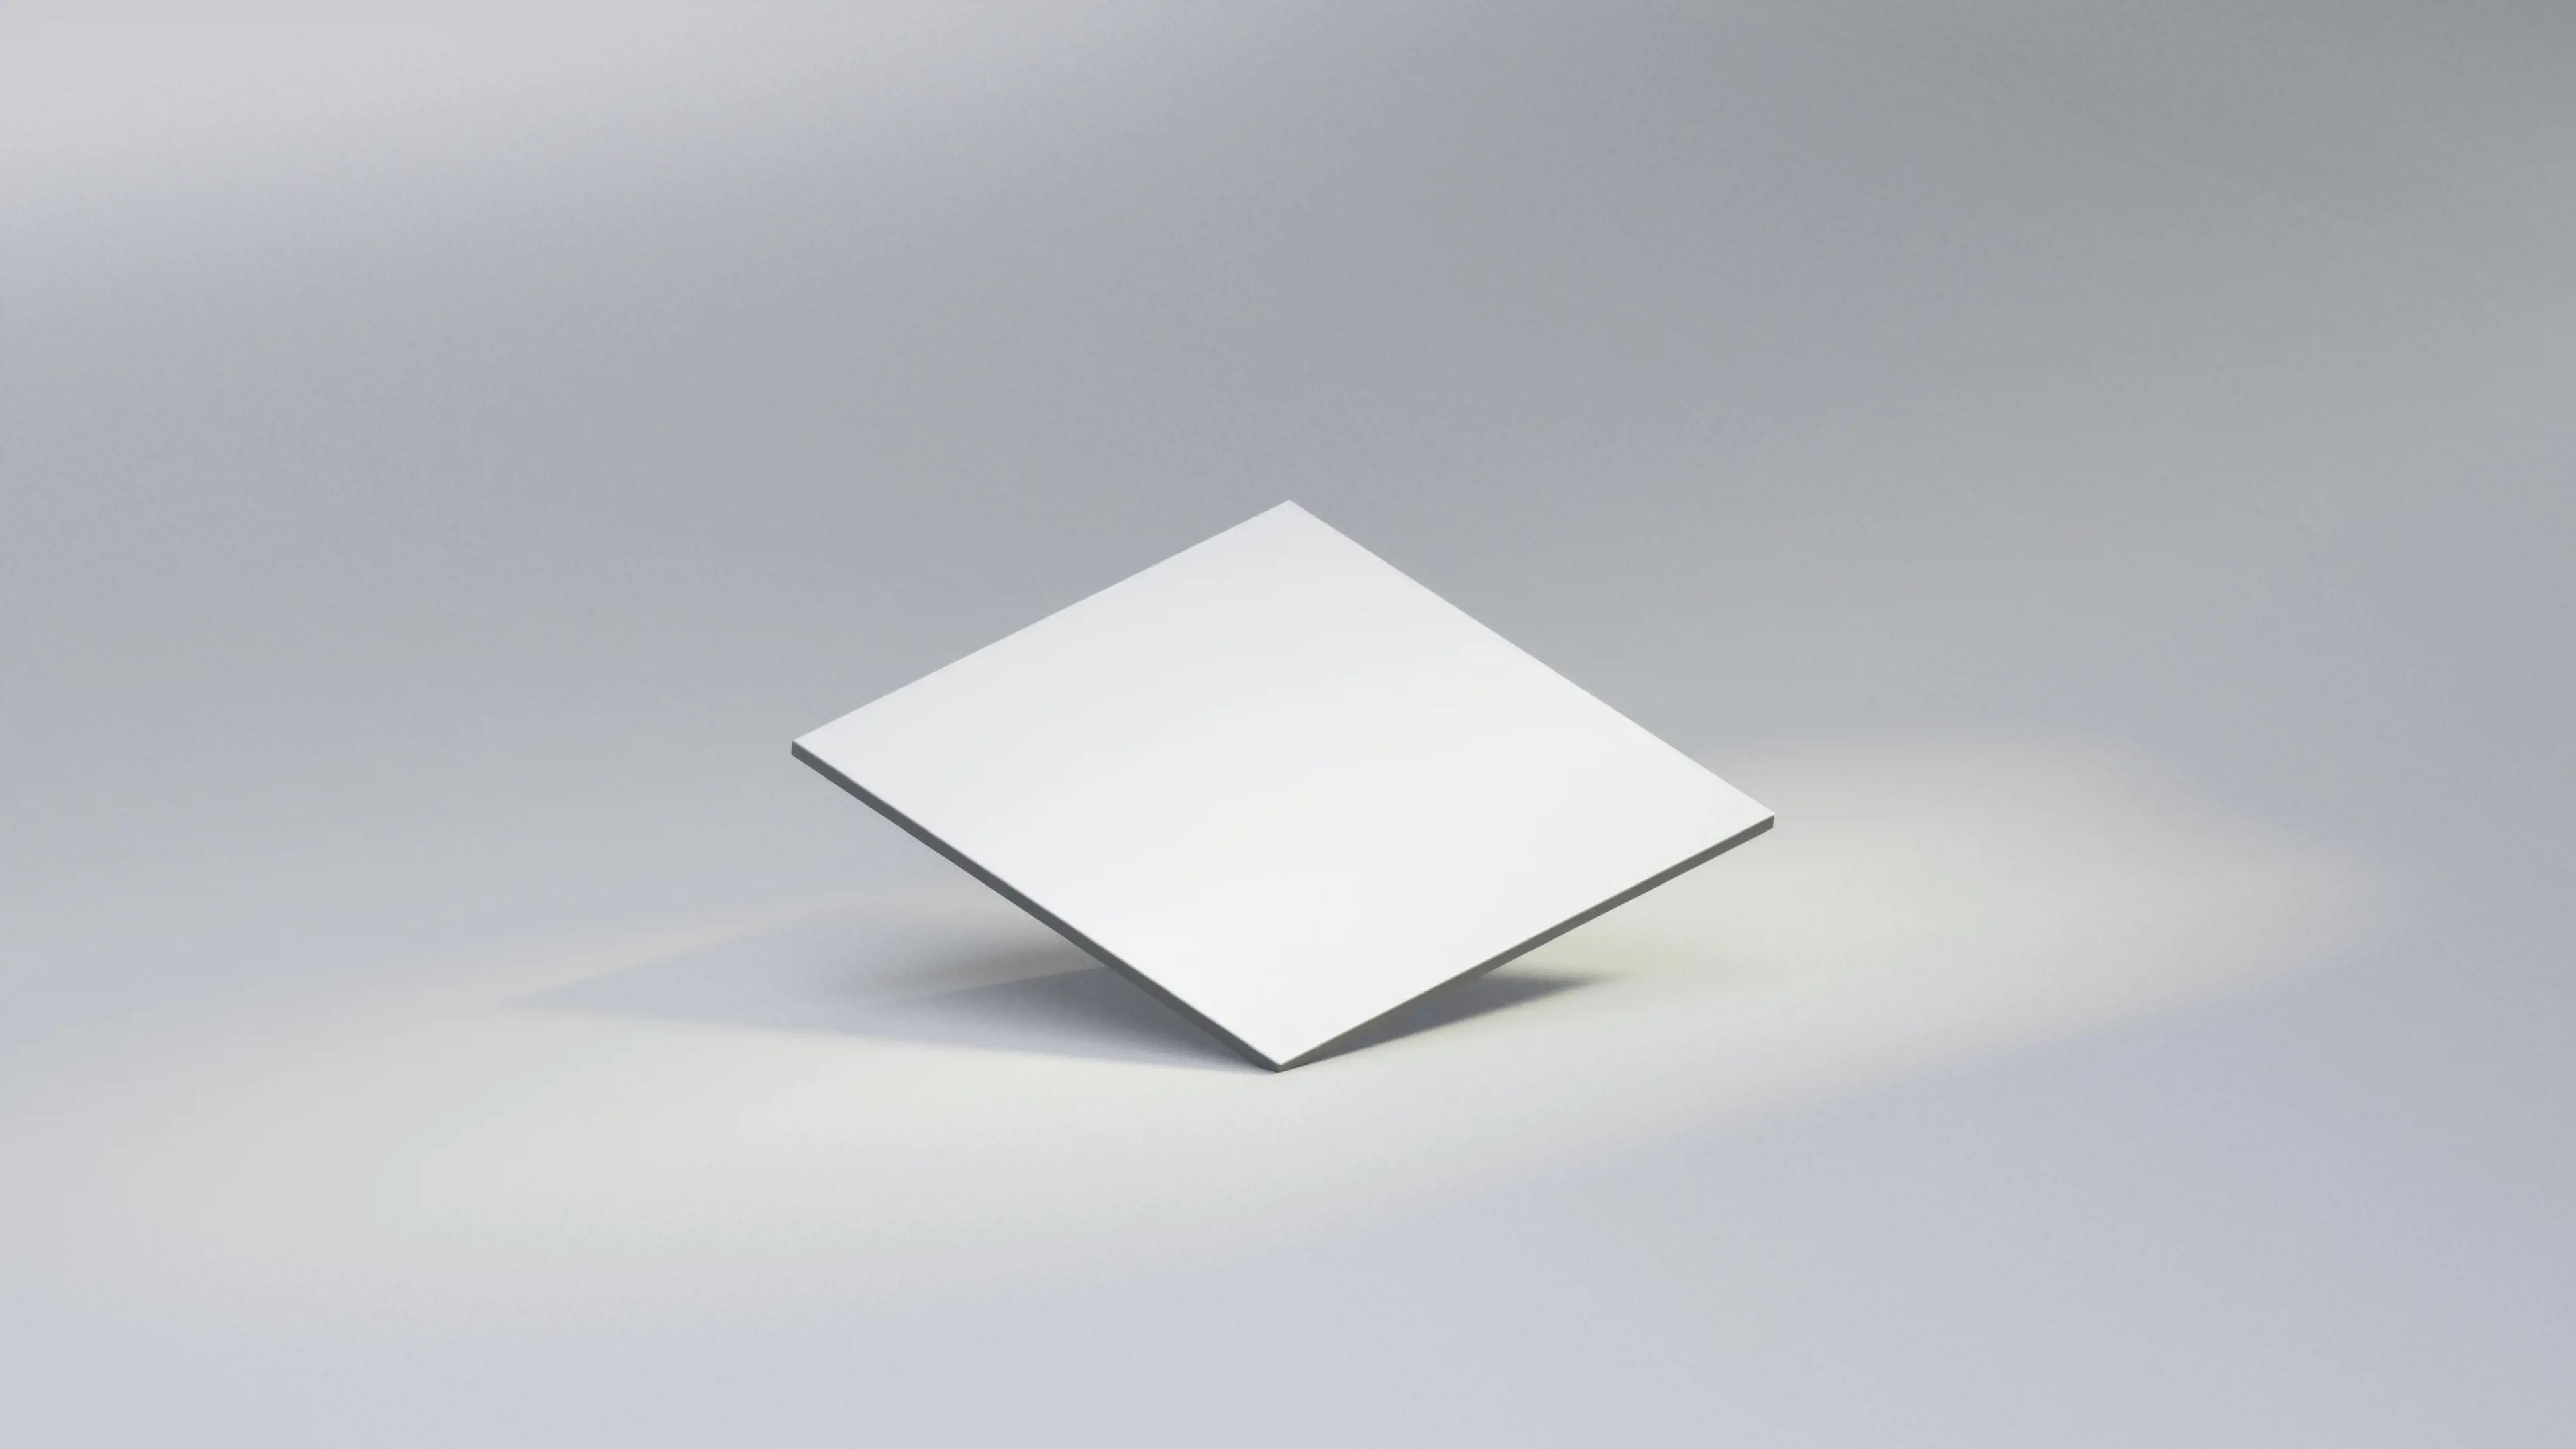 White square floating on grey surface